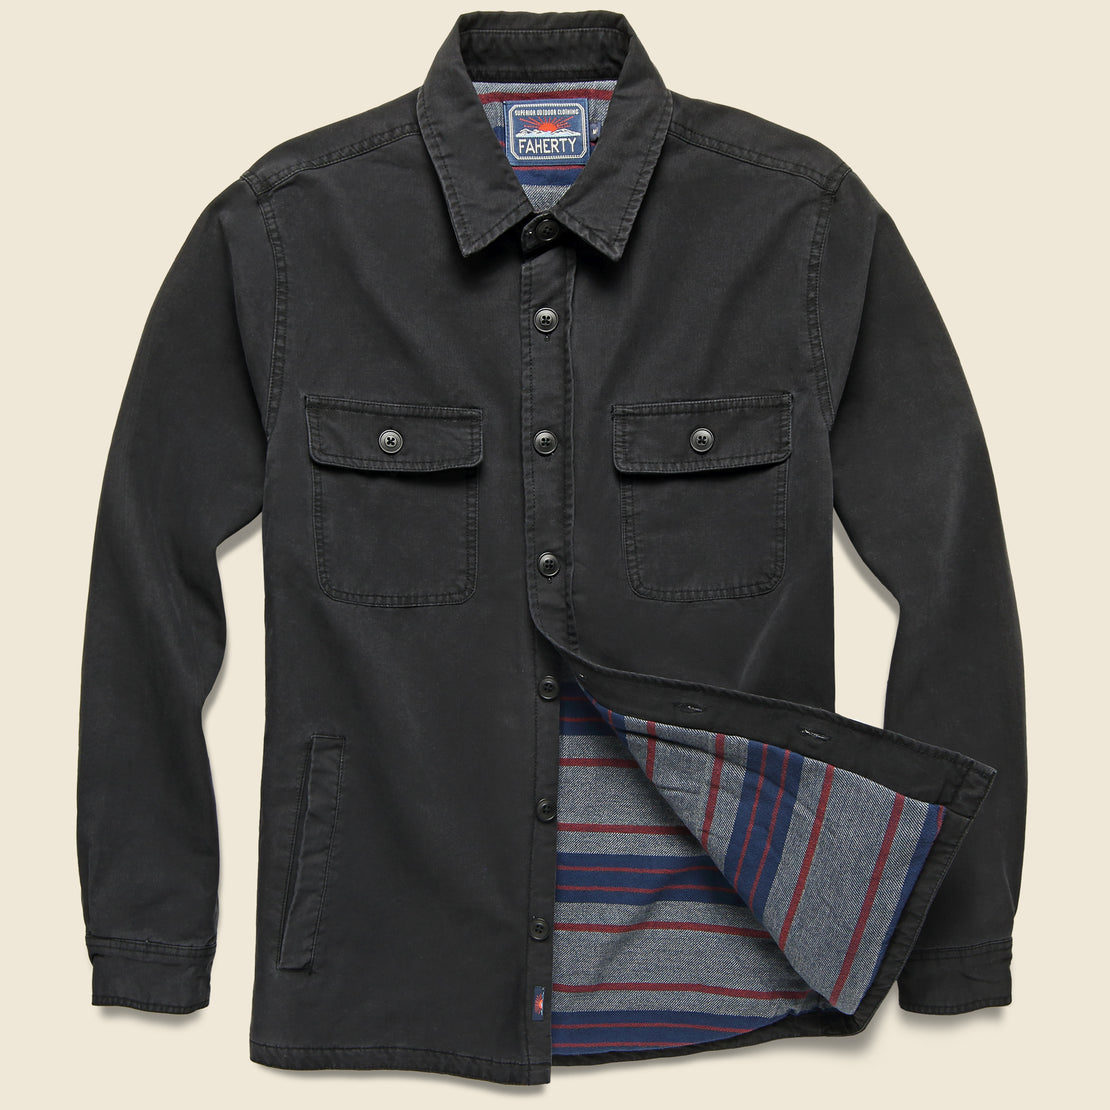 Faherty Blanket Lined CPO Jacket - Sulfur Dyed Black